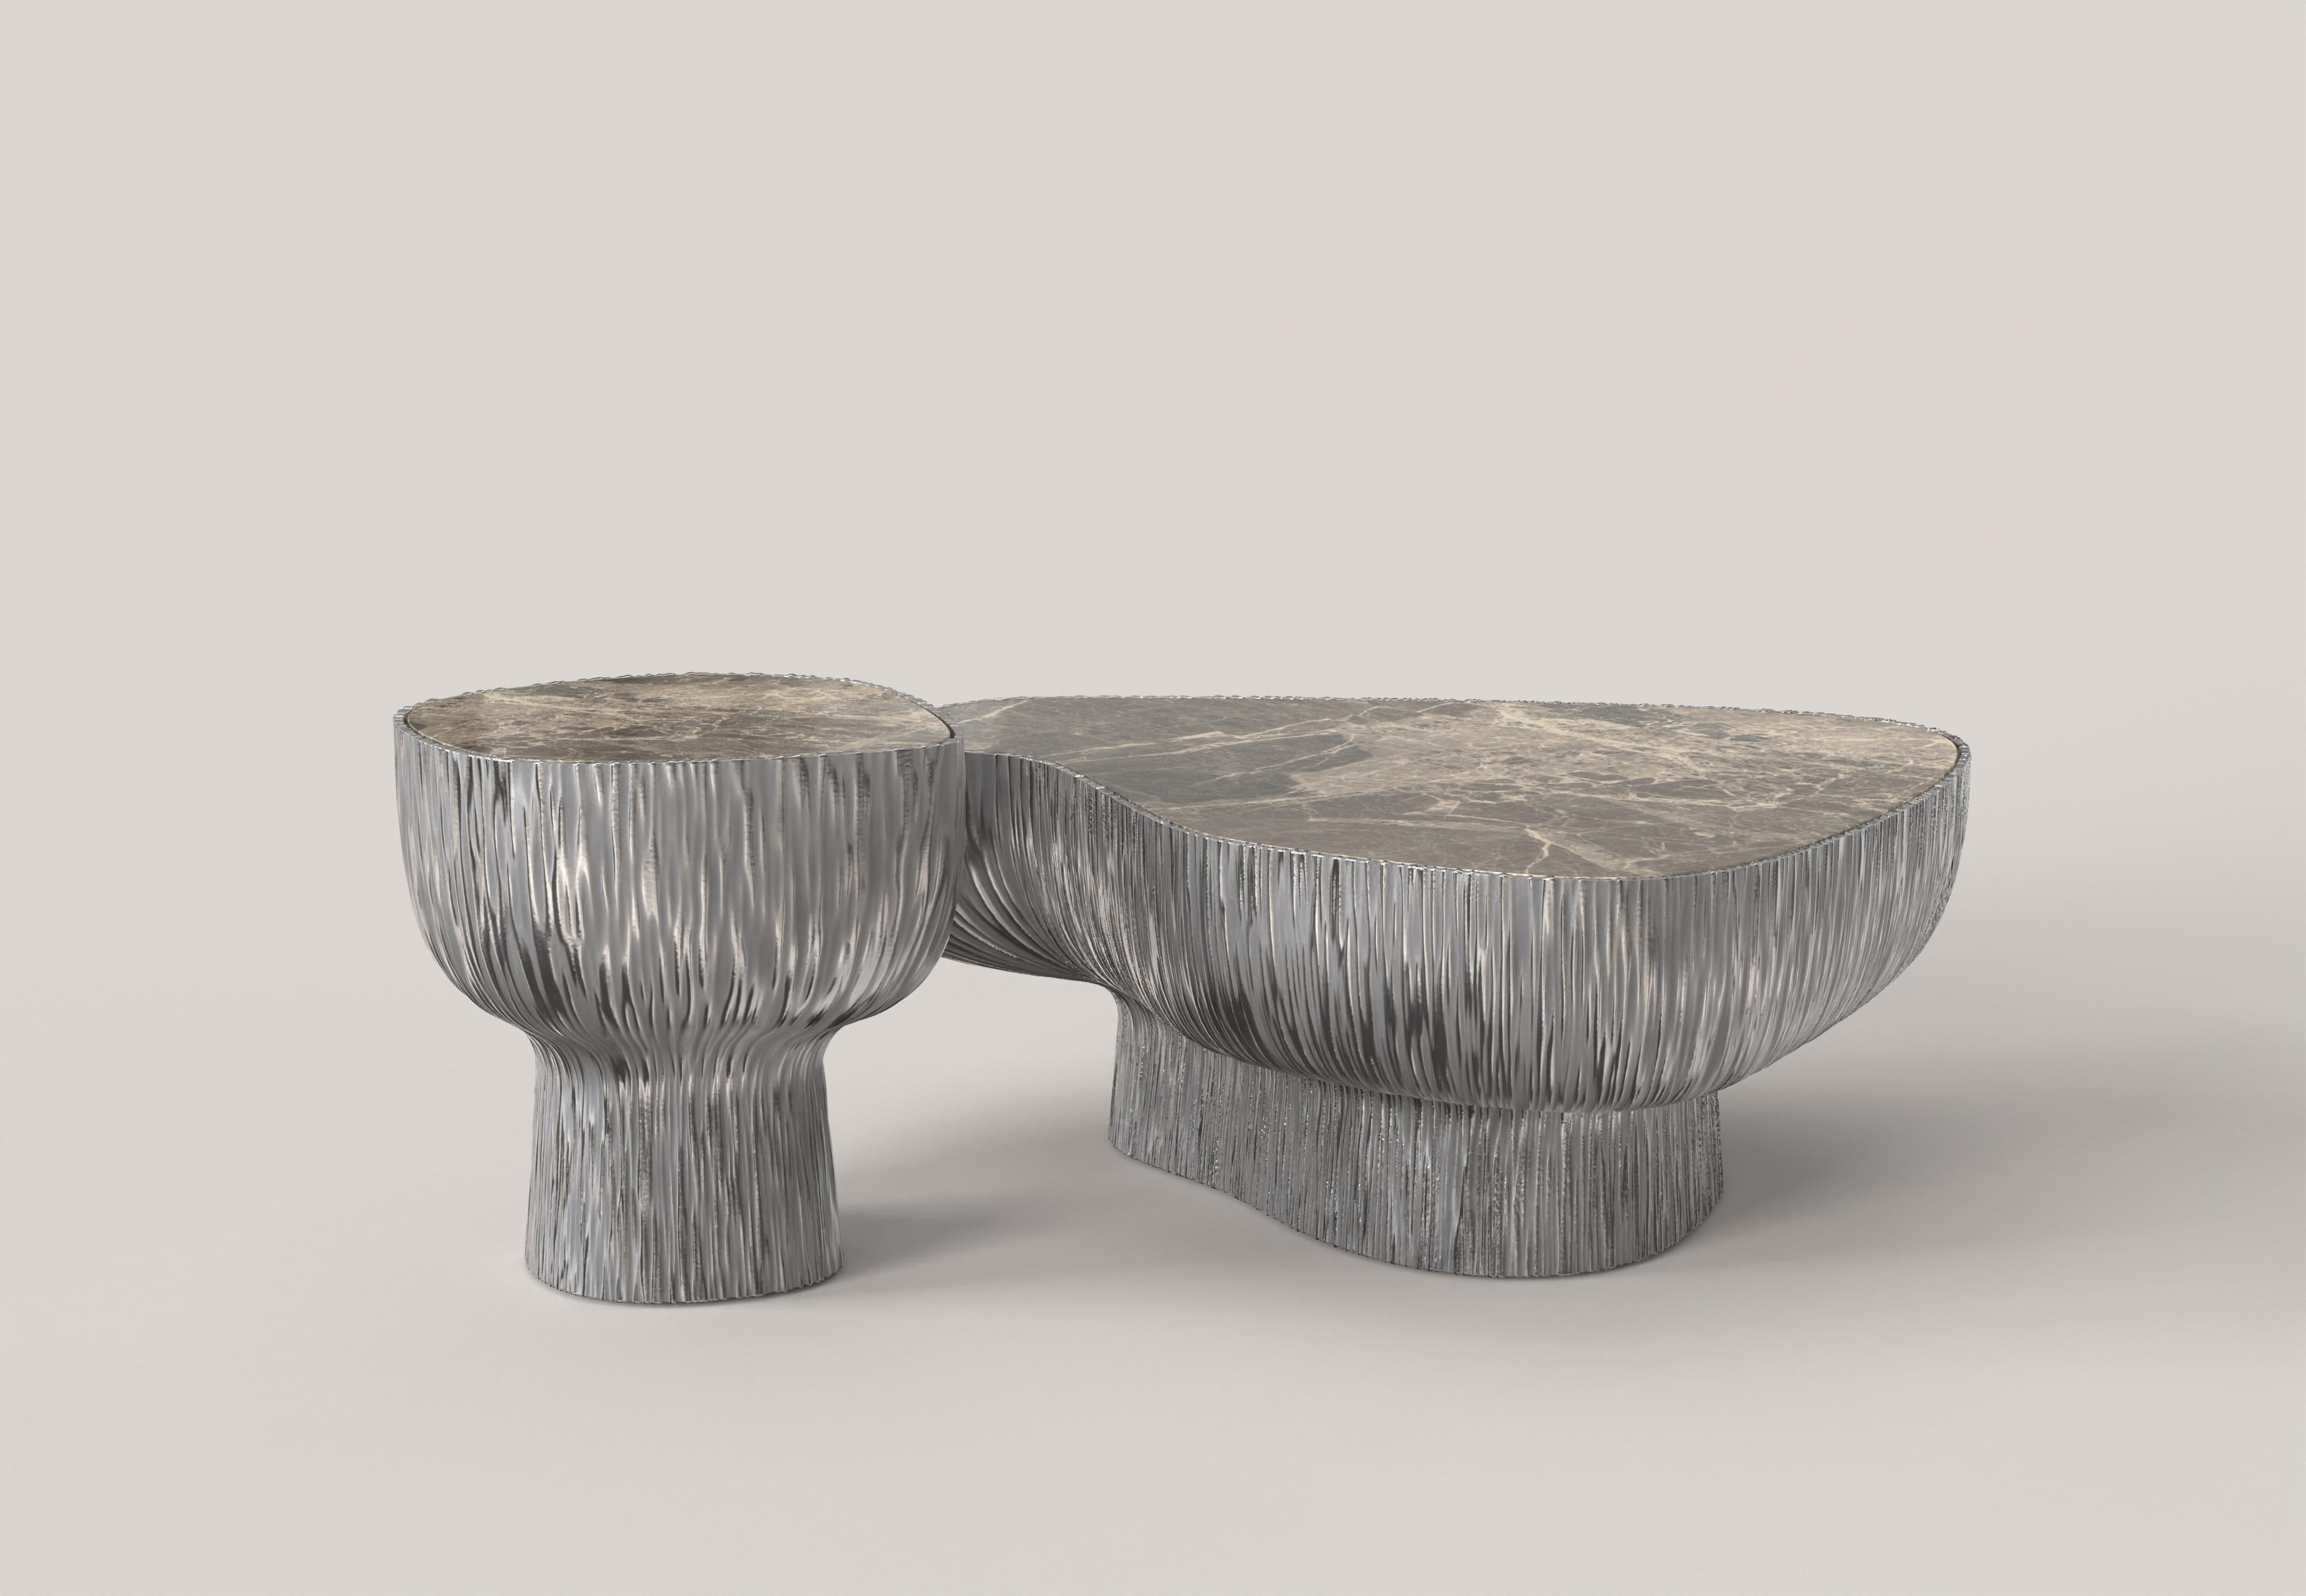 Set of 2 Giava V1 and V2 Low Table by Edizione Limitata
Limited Edition of 15+3. Signed and numbered.
Dimensions: 
V1: D 39.5 x W 40 x H 43 cm
V2: D 75 x W 89 x H 76 cm
Materials: Aluminium, Breccia Paradiso Marble.

Edizione Limitata, that is to